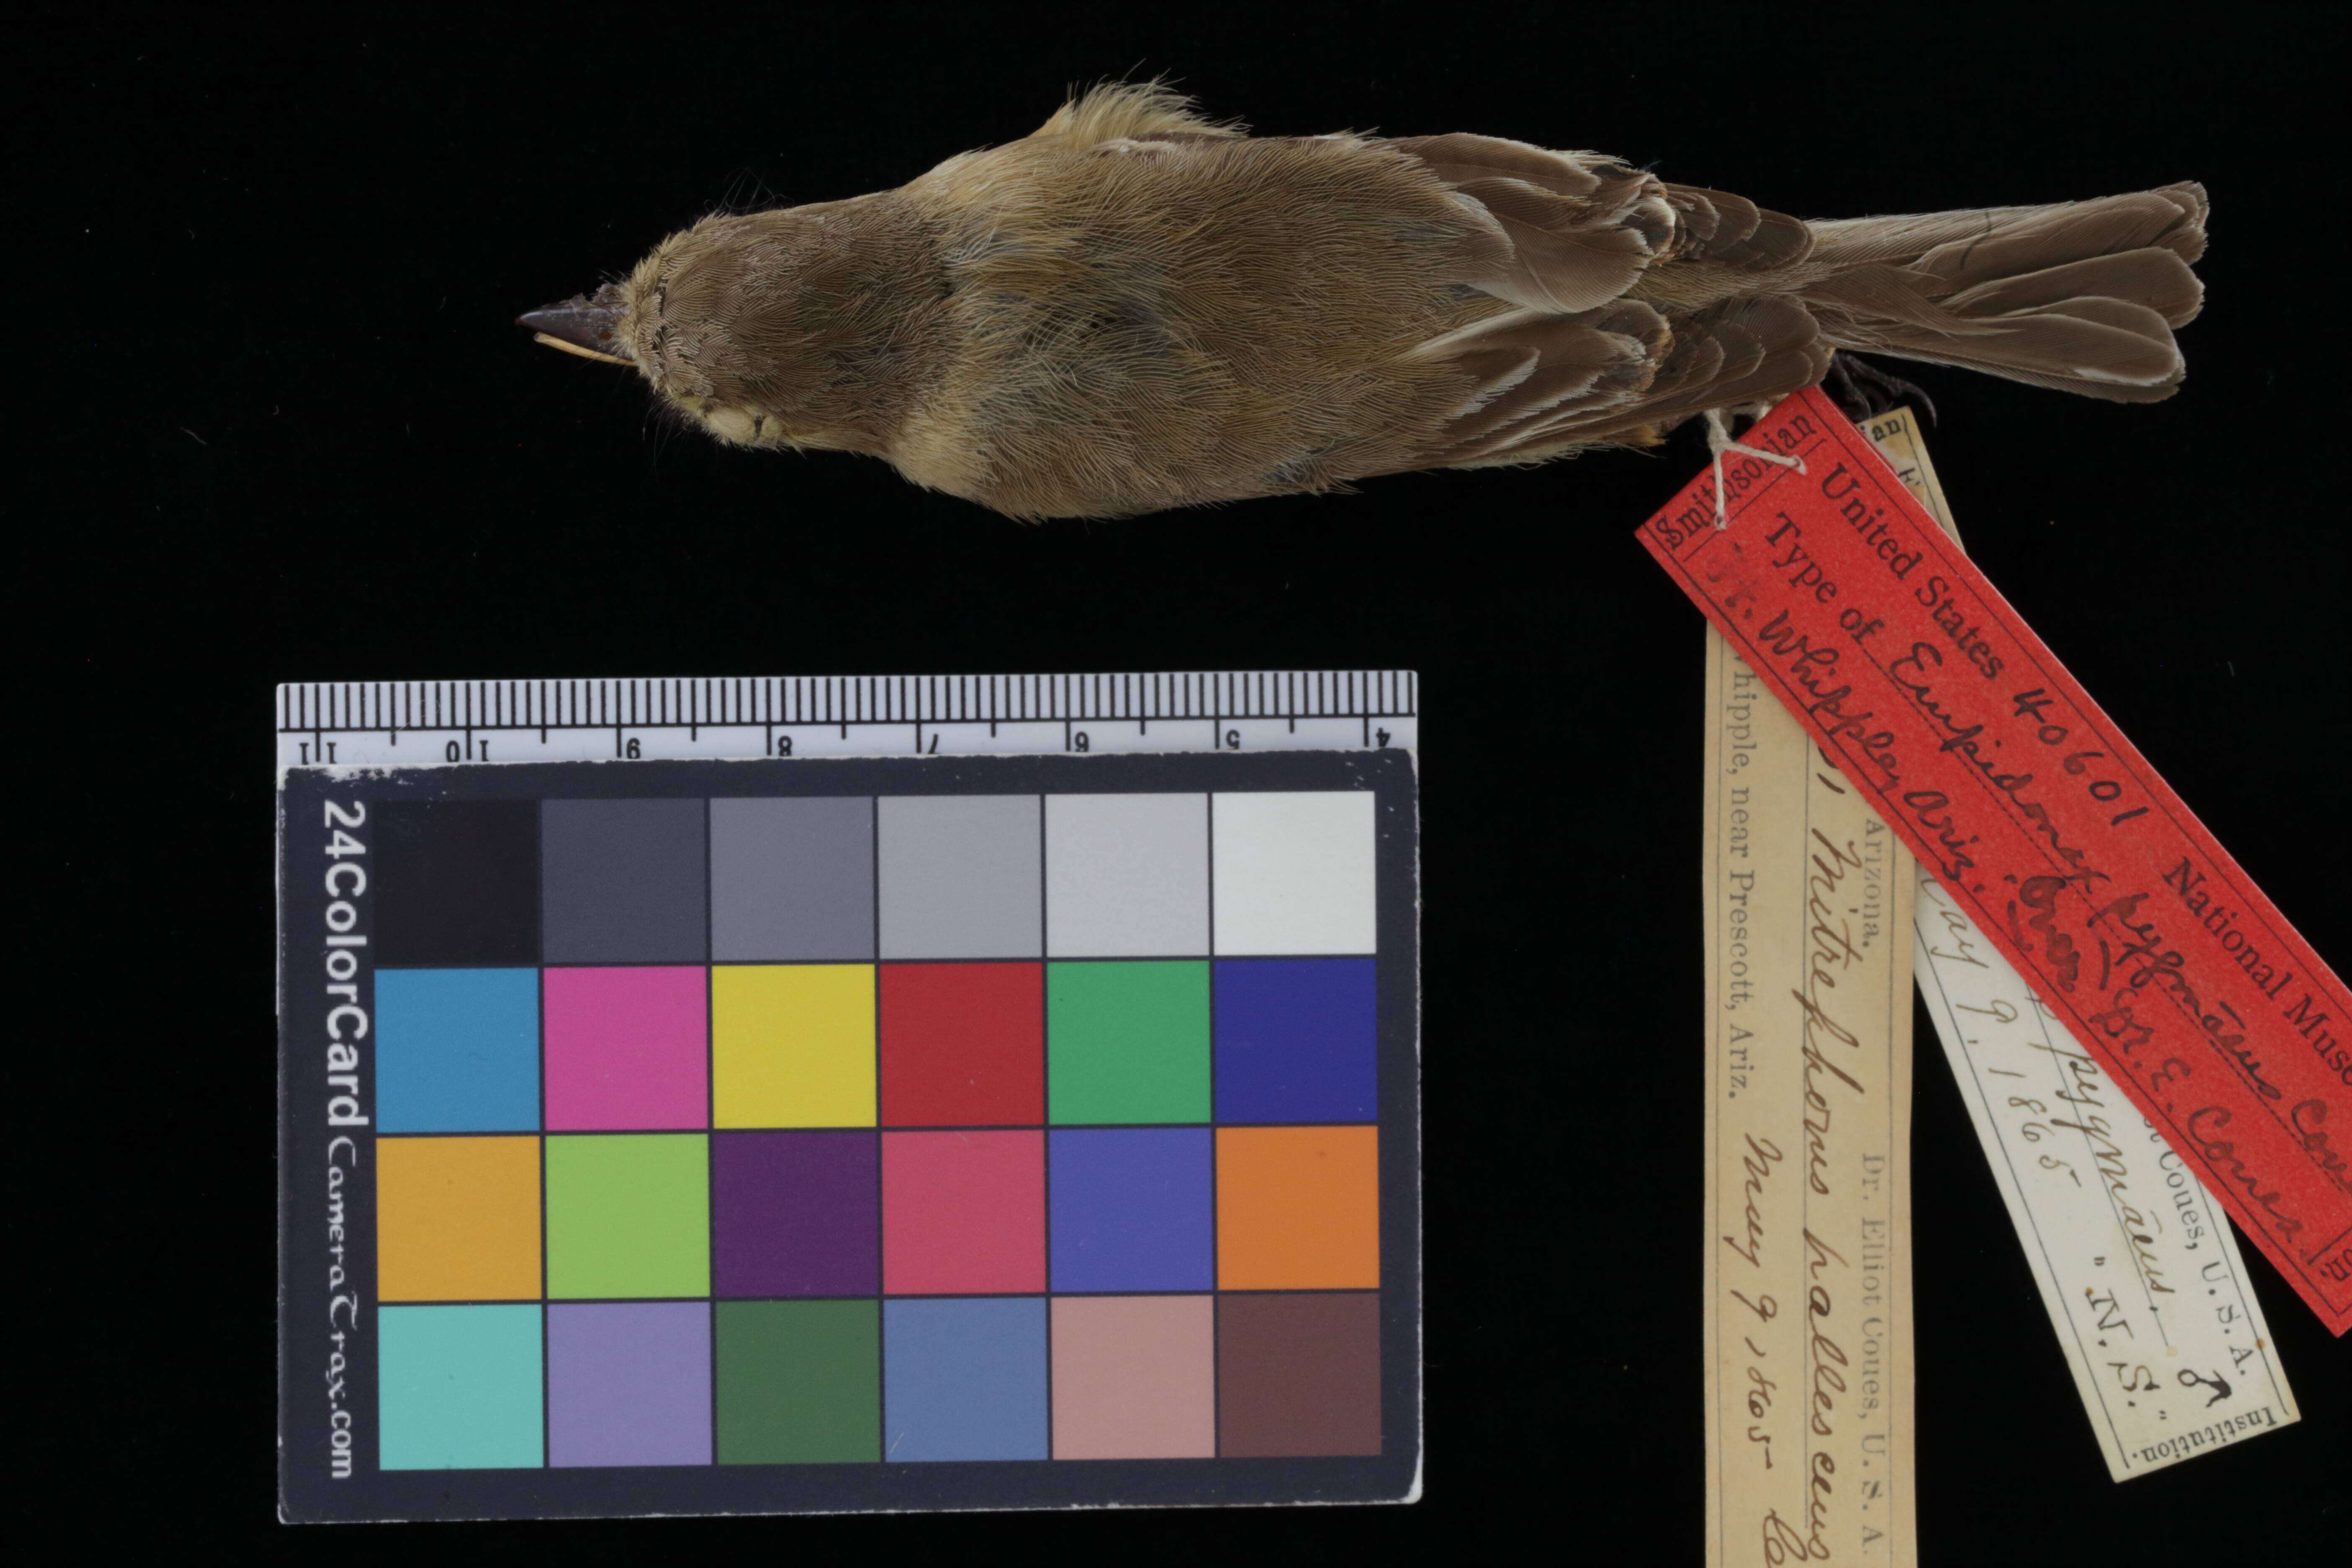 Image of Empidonax fulvifrons pygmaeus Coues 1865